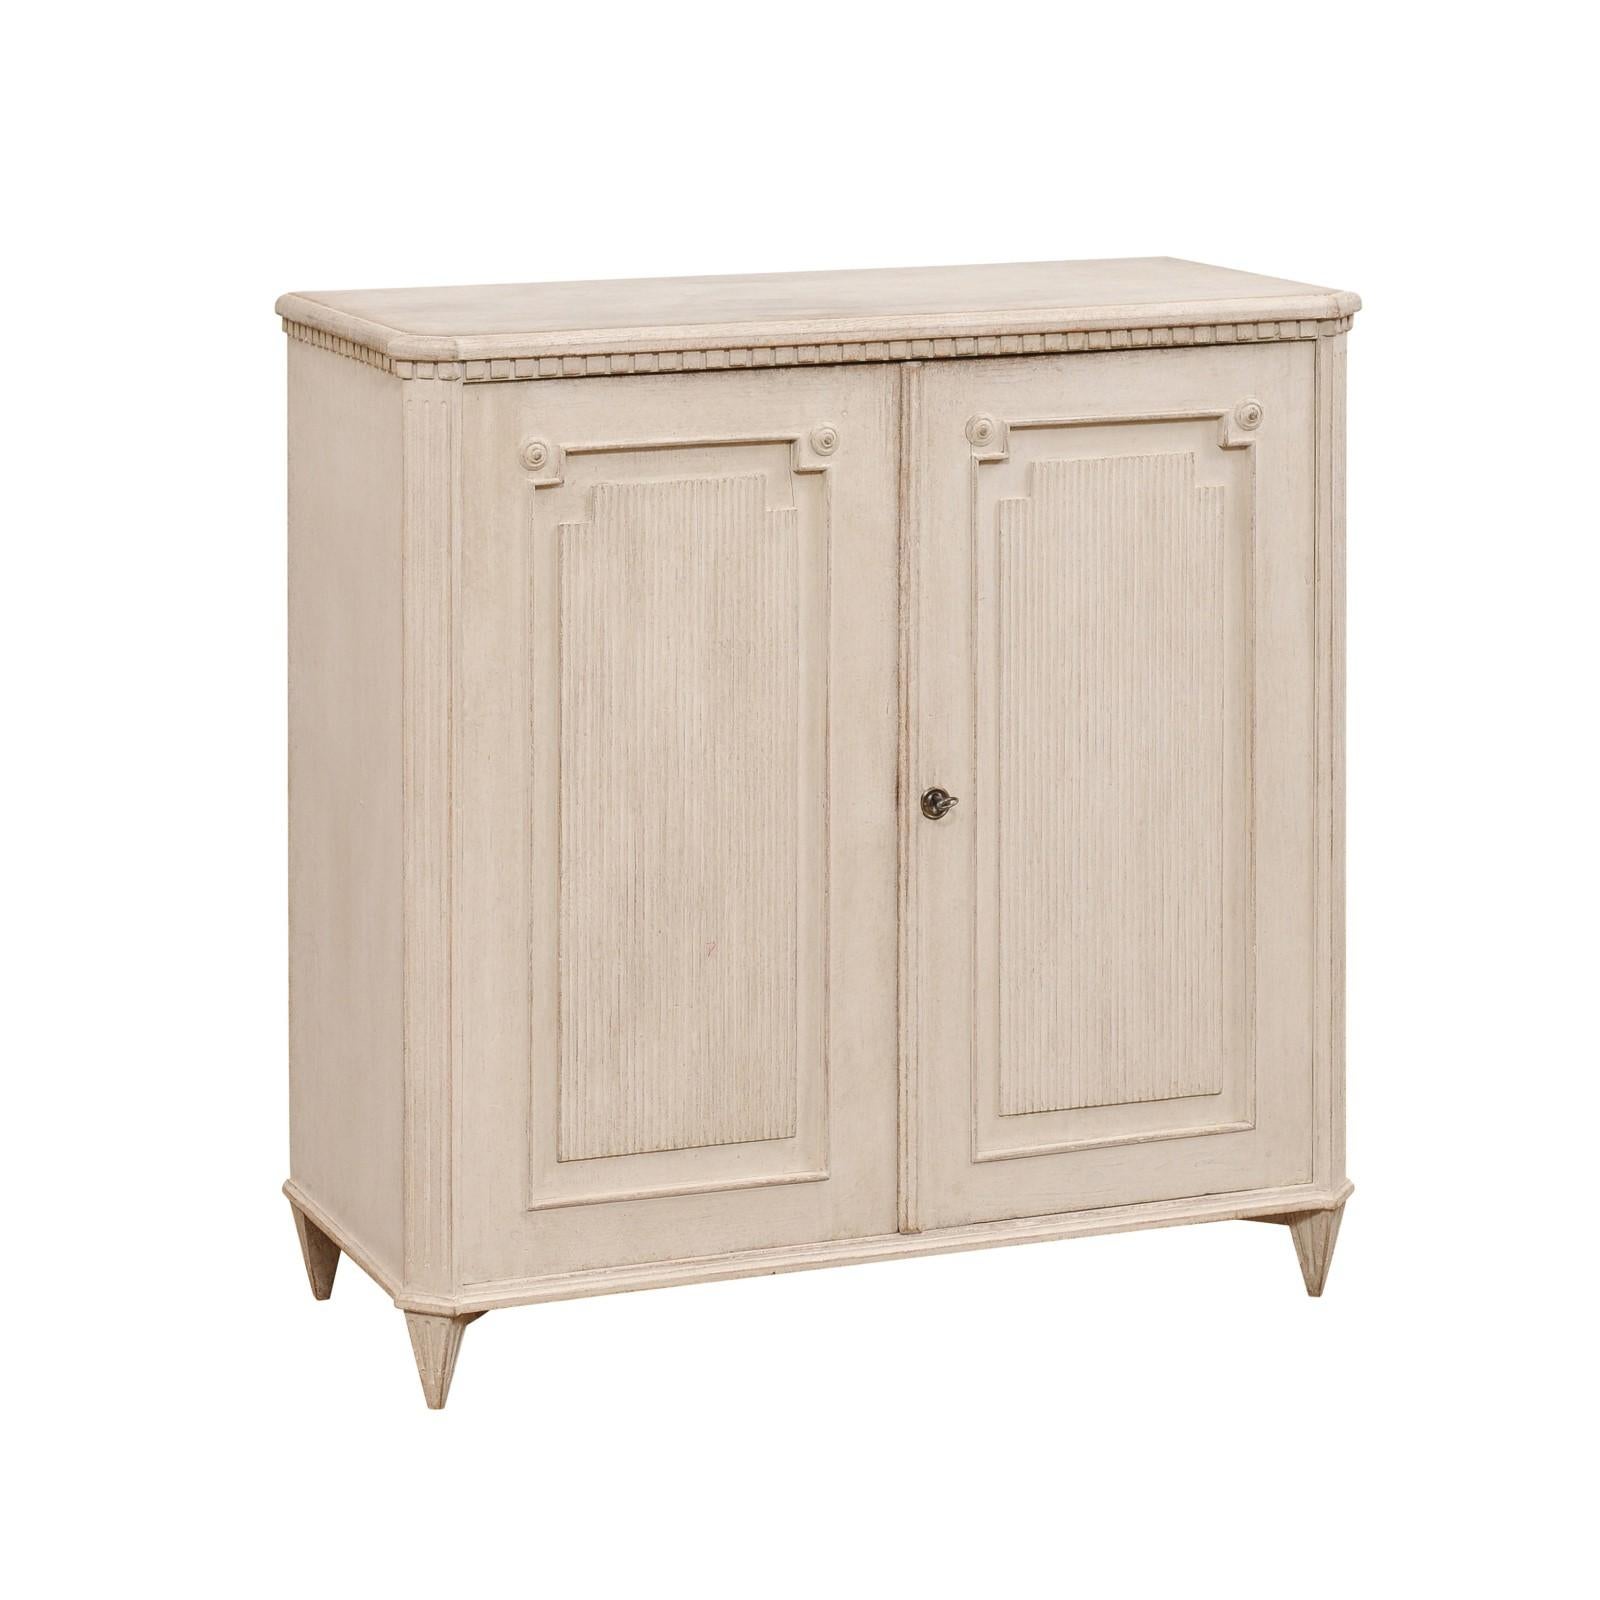 A Swedish Gustavian style painted wood sideboard from the 19th century with carved dentil molding, two doors with reeded accents and short tapered feet. Beautify your space with this 19th-century Swedish Gustavian style painted wood sideboard, a